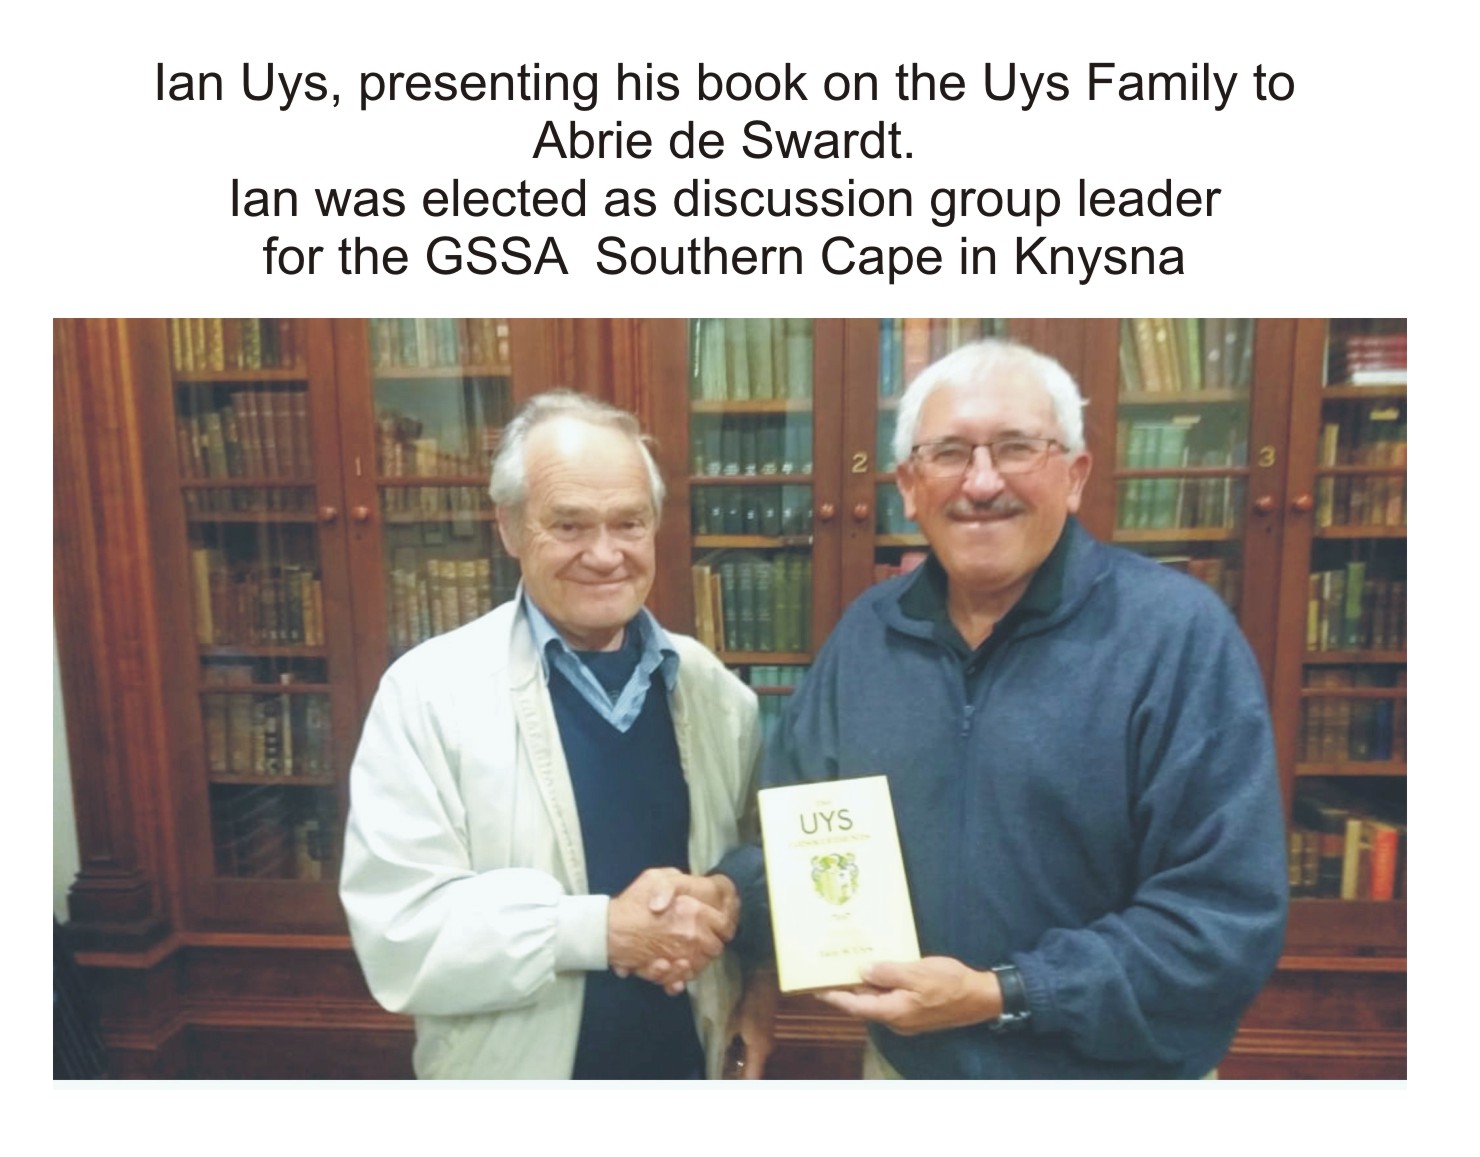 Ian Uyspresents his book on the Uys family to Abrie de Swardt.Ian was elected as discussion group leader of the GSSA Southern Cape in Knysna